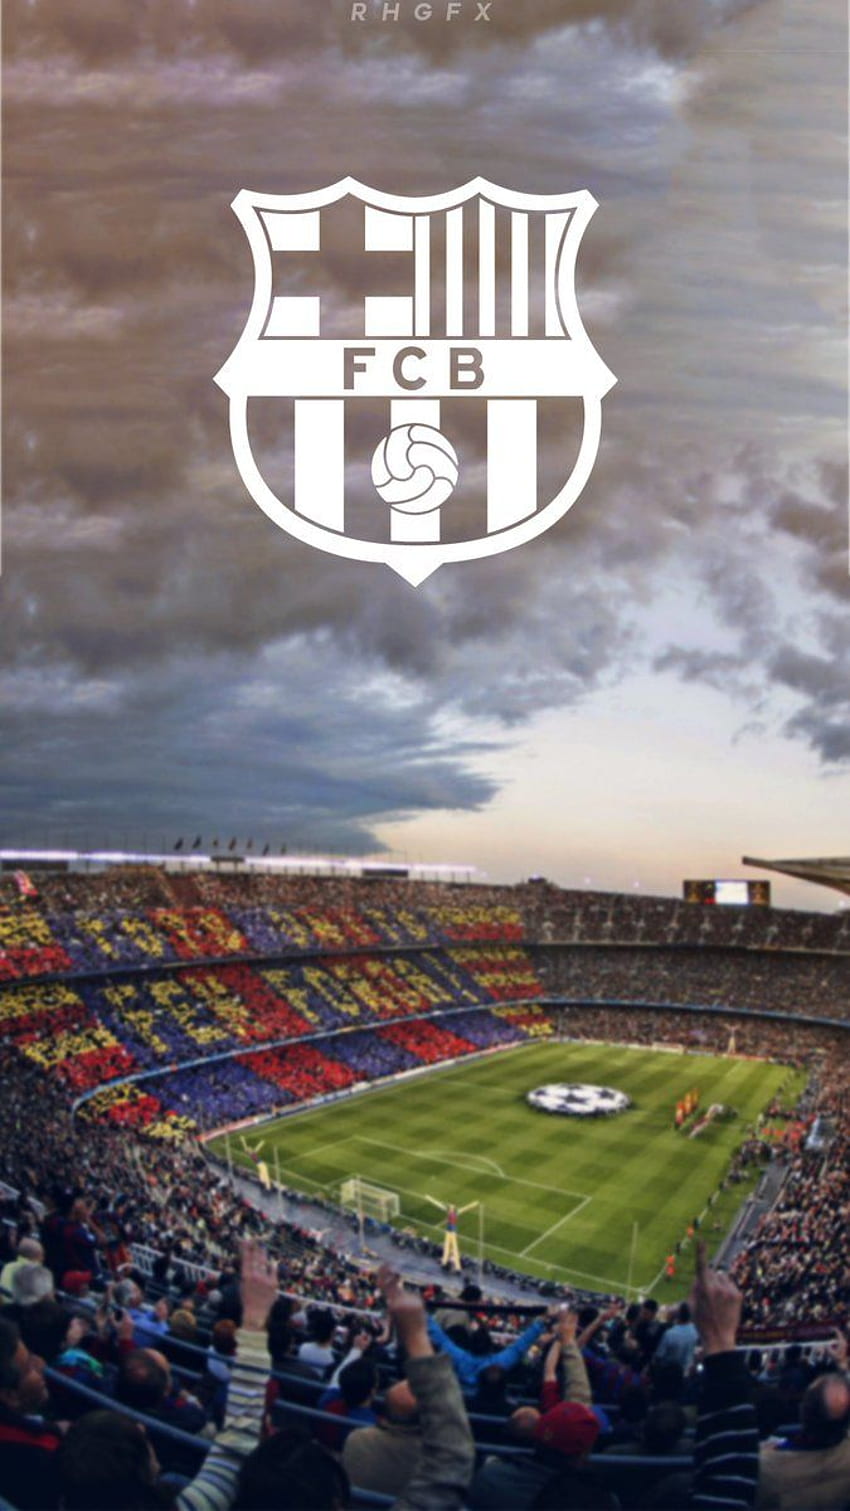 fc Barcelona Wallpapers, HD fc Barcelona Backgrounds, Free Images Download